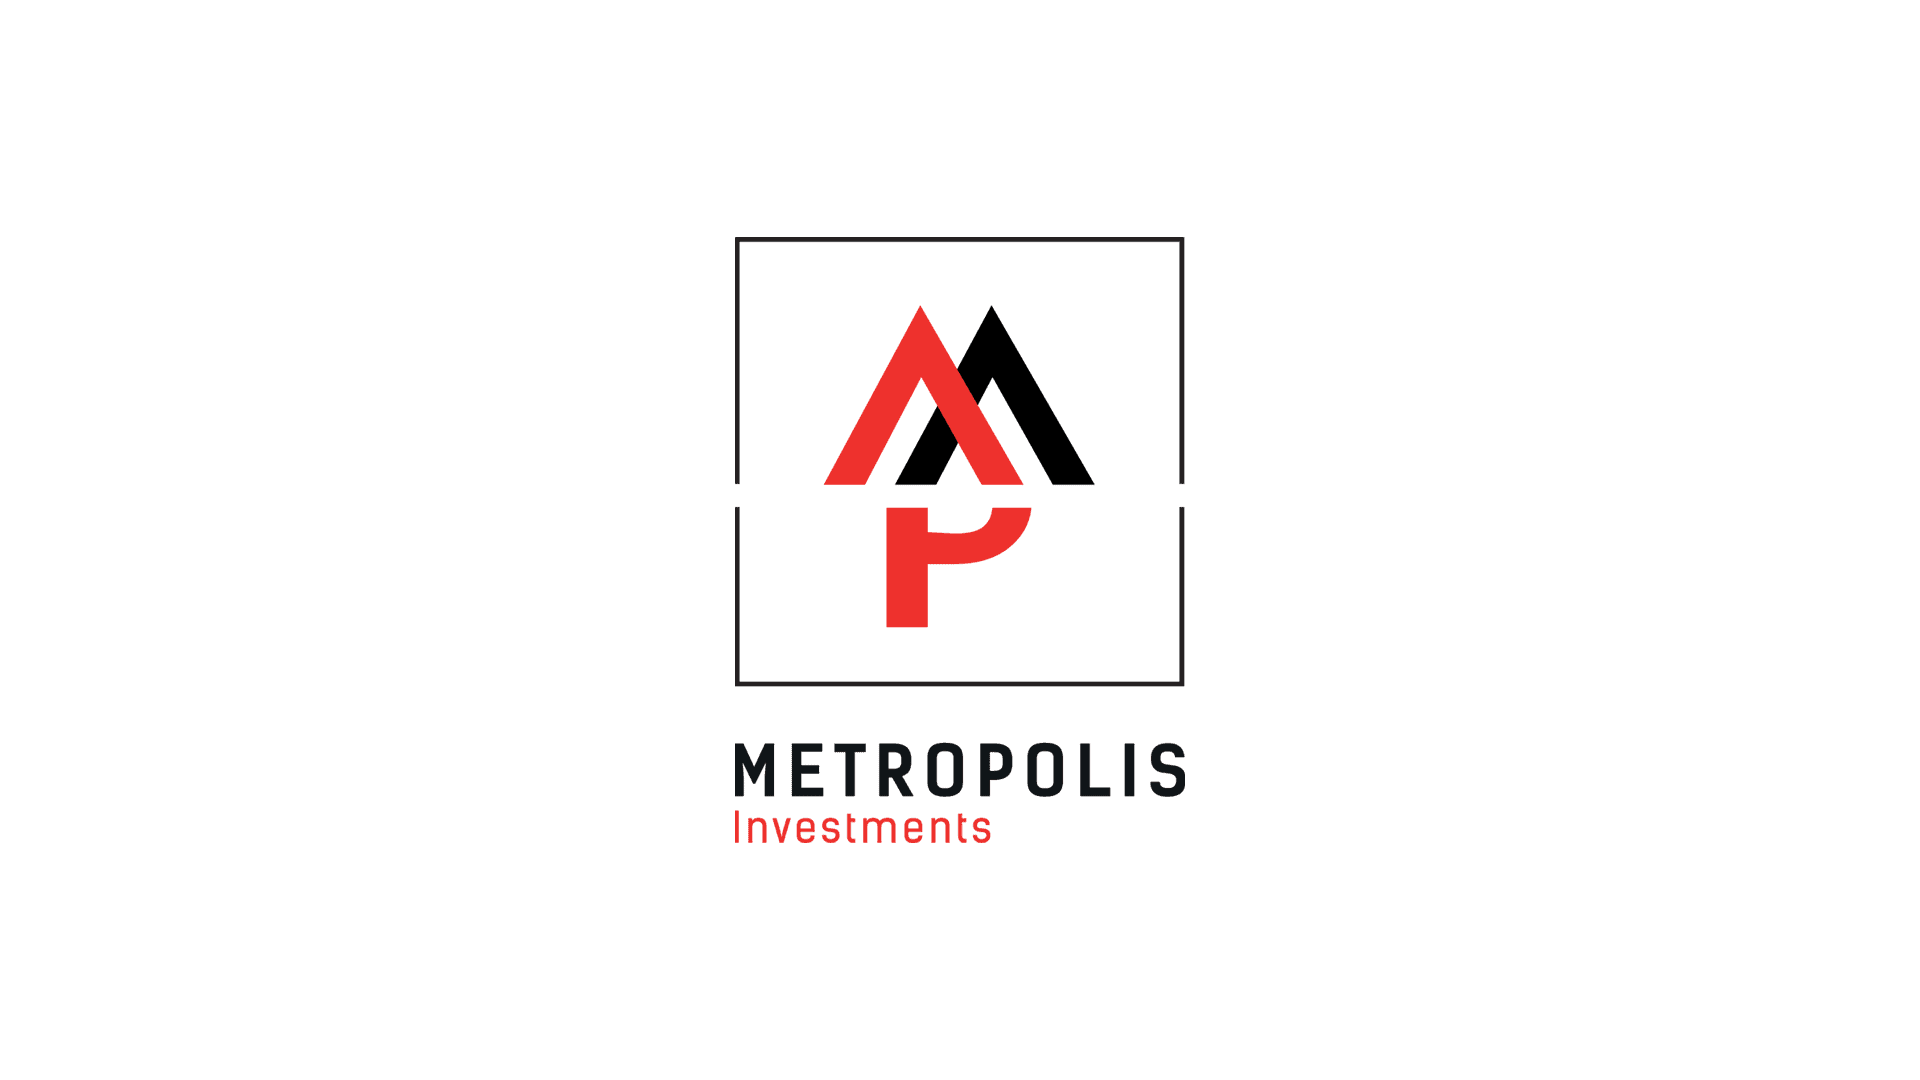 Metropolis Investments recommends our services